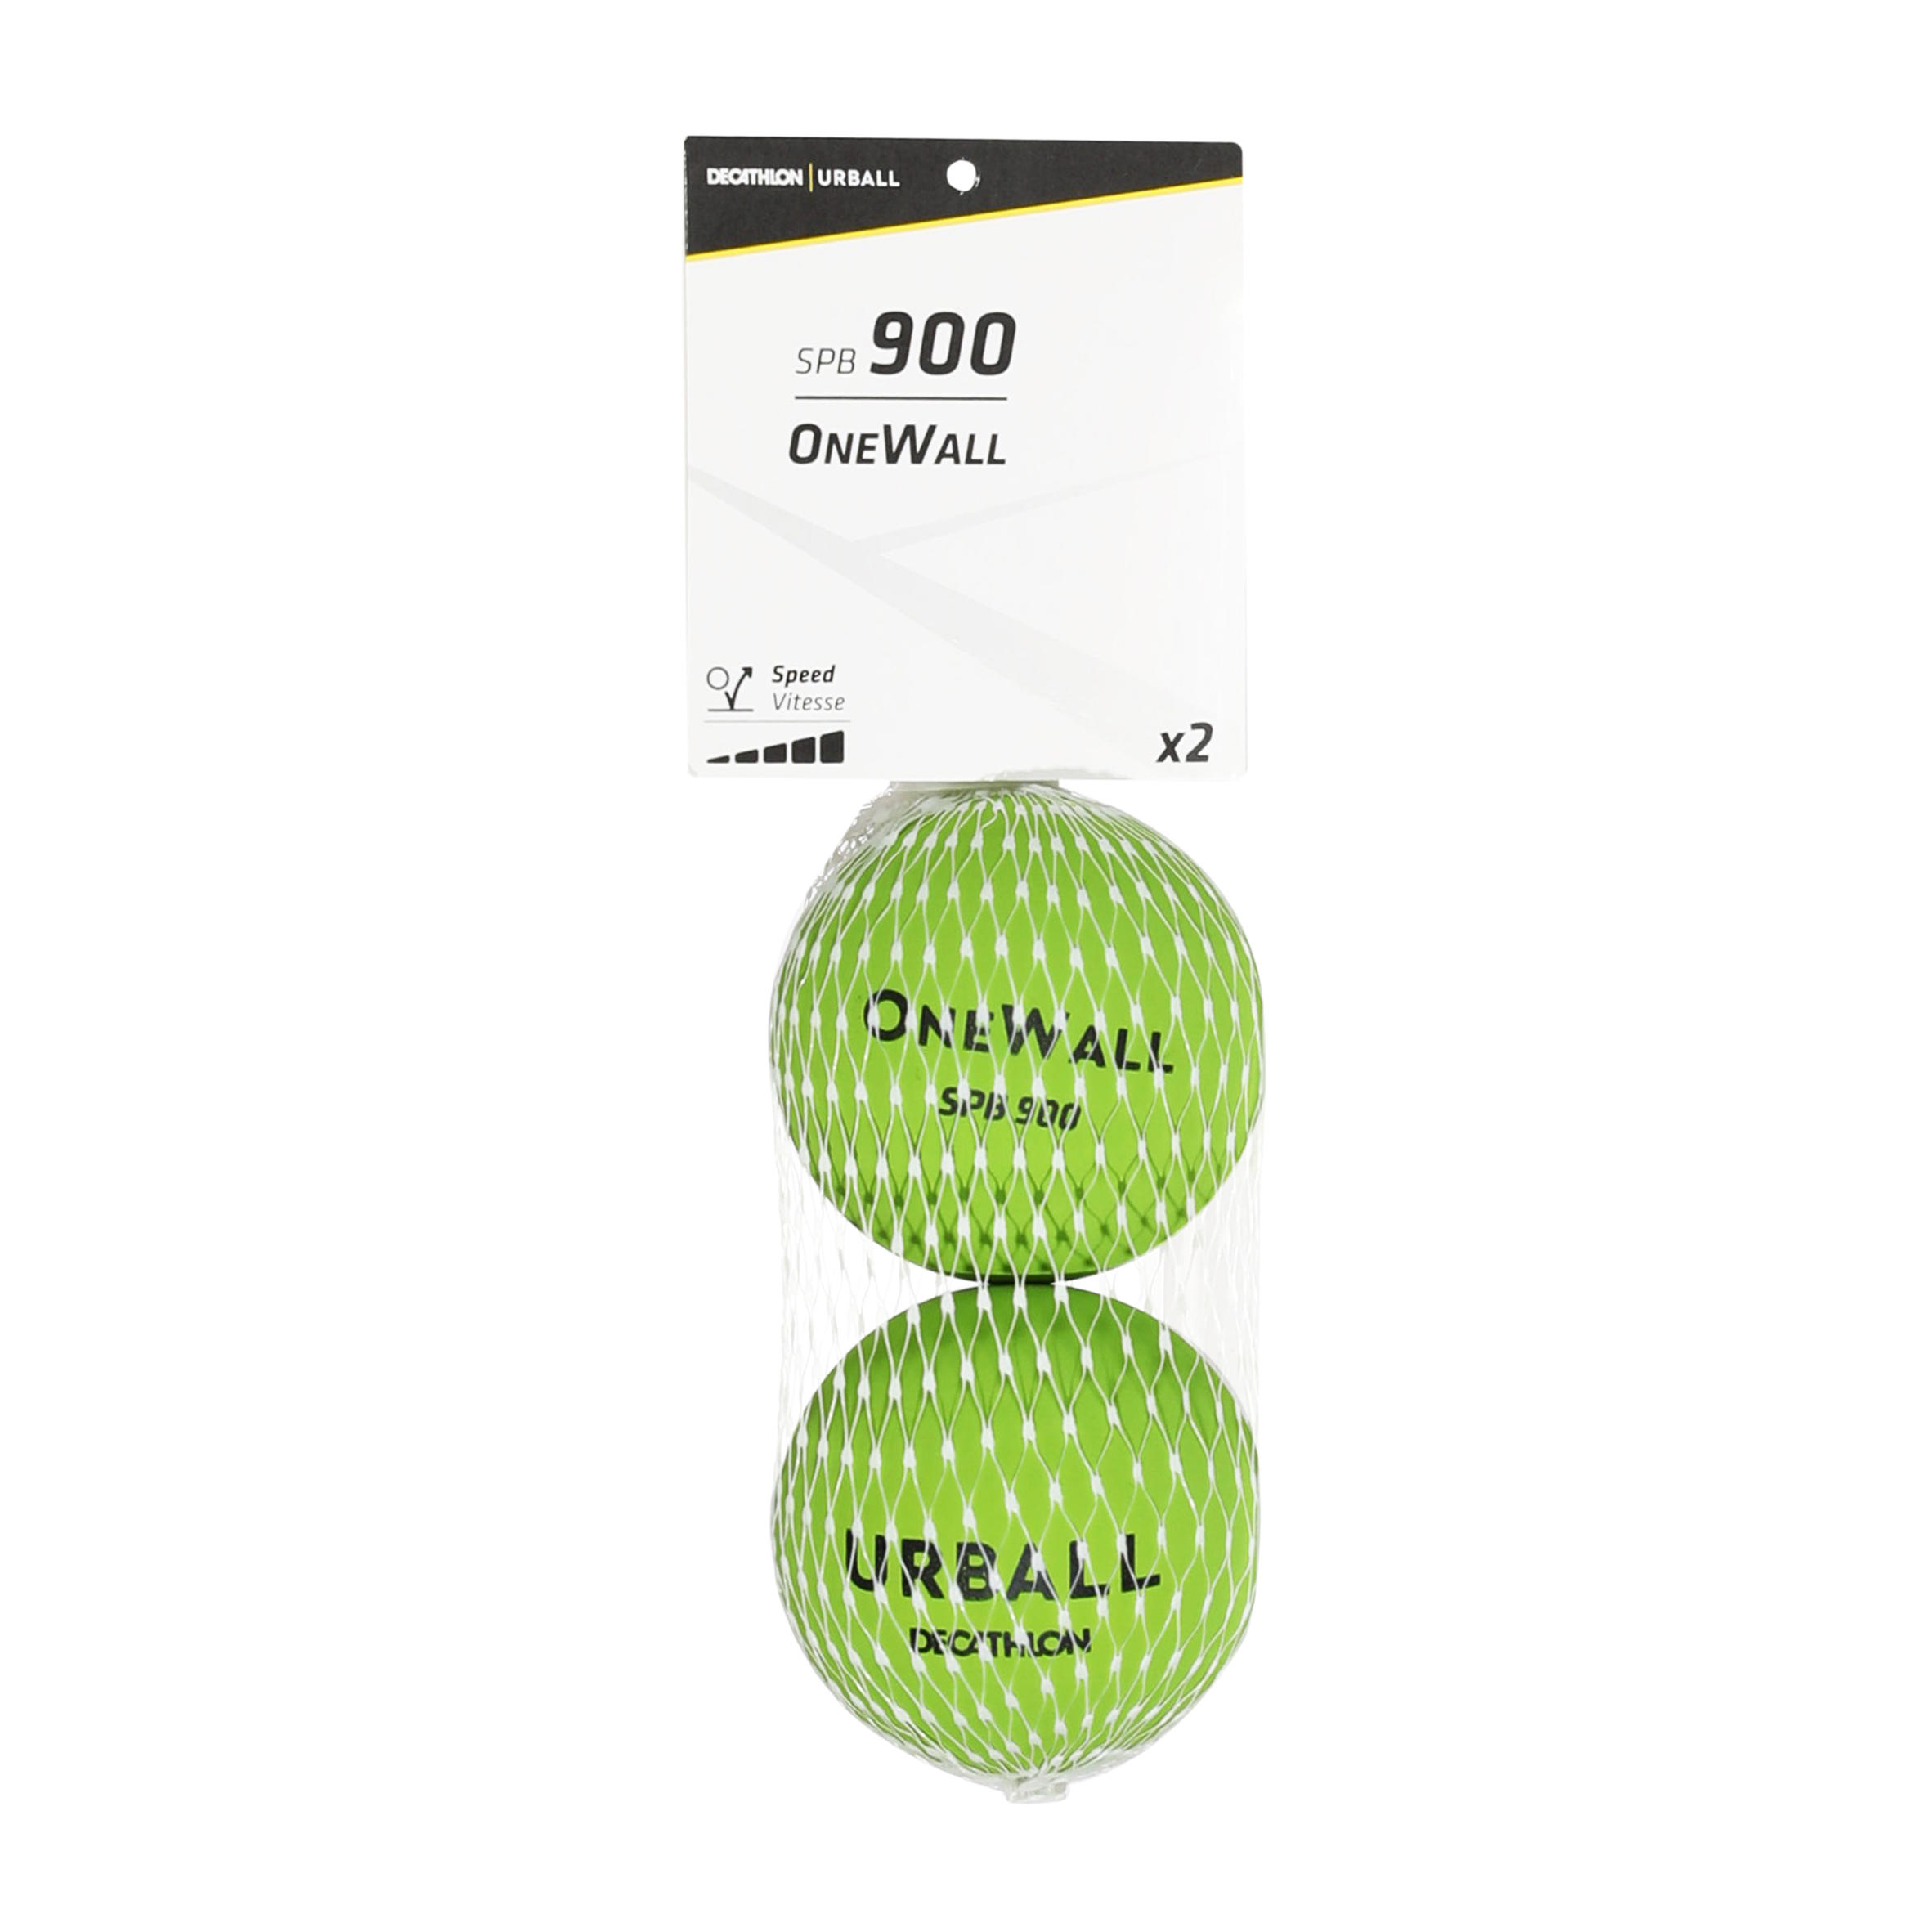 One Wall Balls SPB 900 Two-Pack - Green 4/5